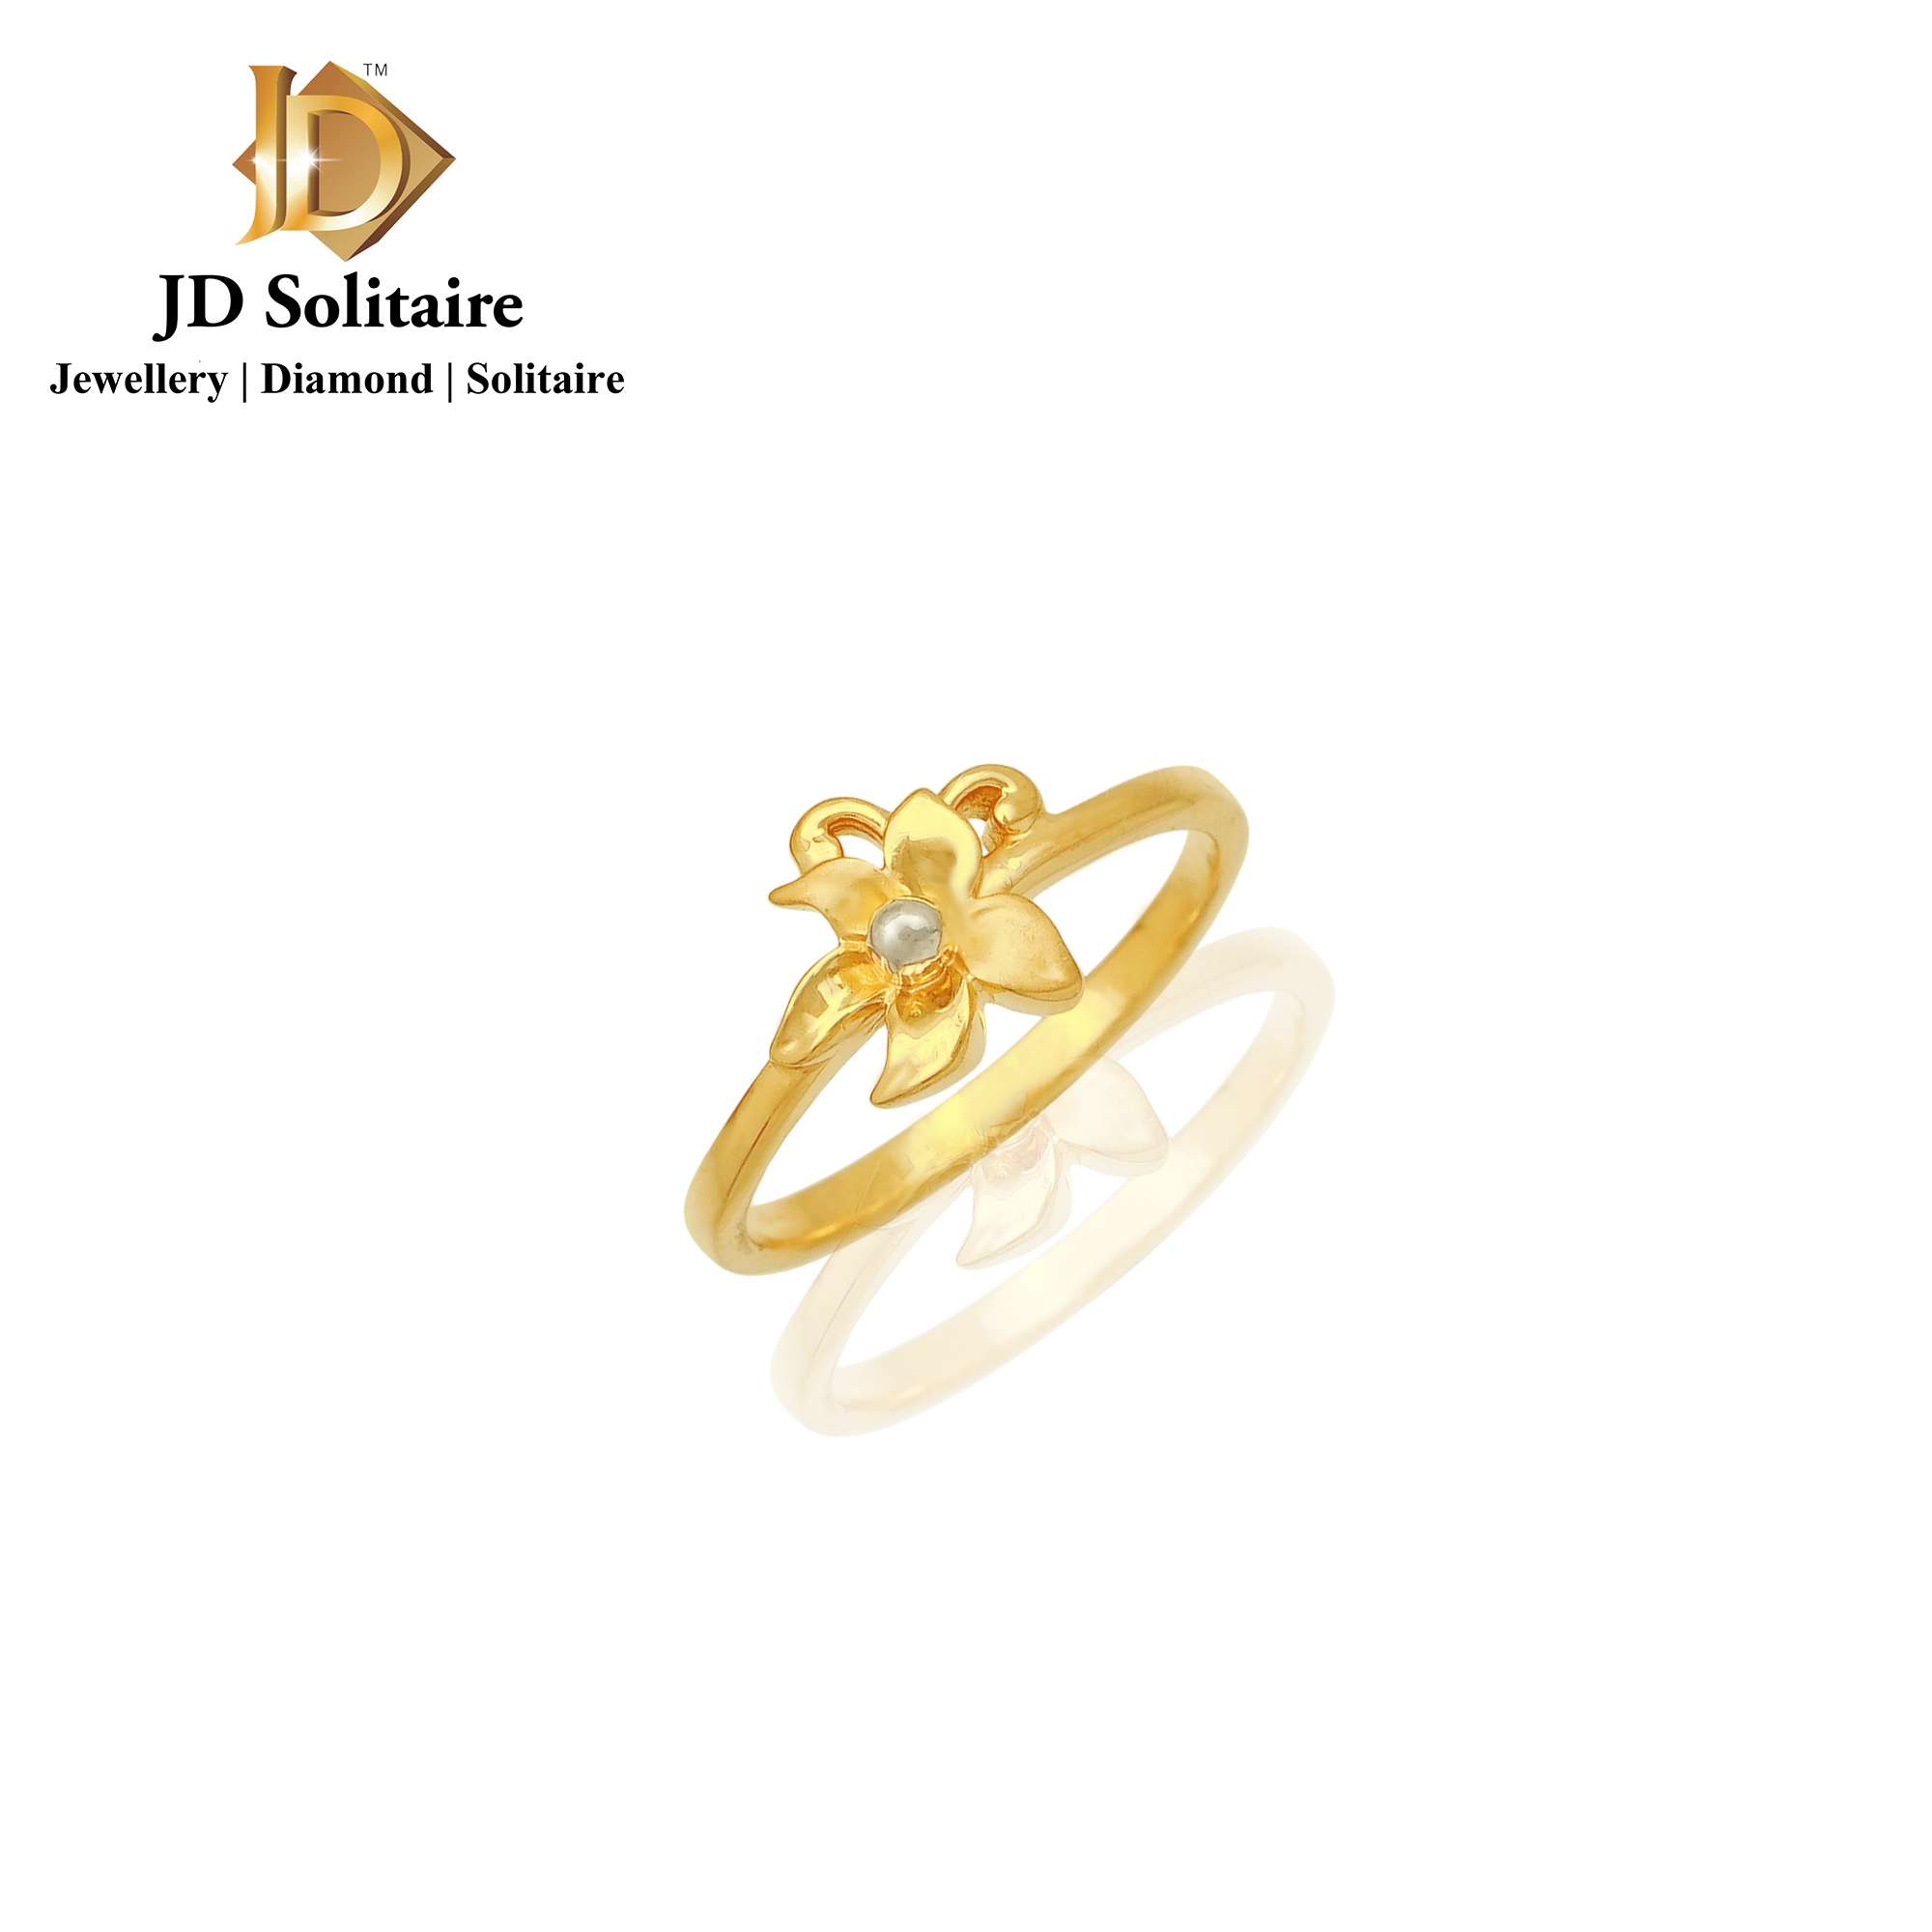 Fancy Gold Plated Solitaire Ring Adjustable for Perfect Fit